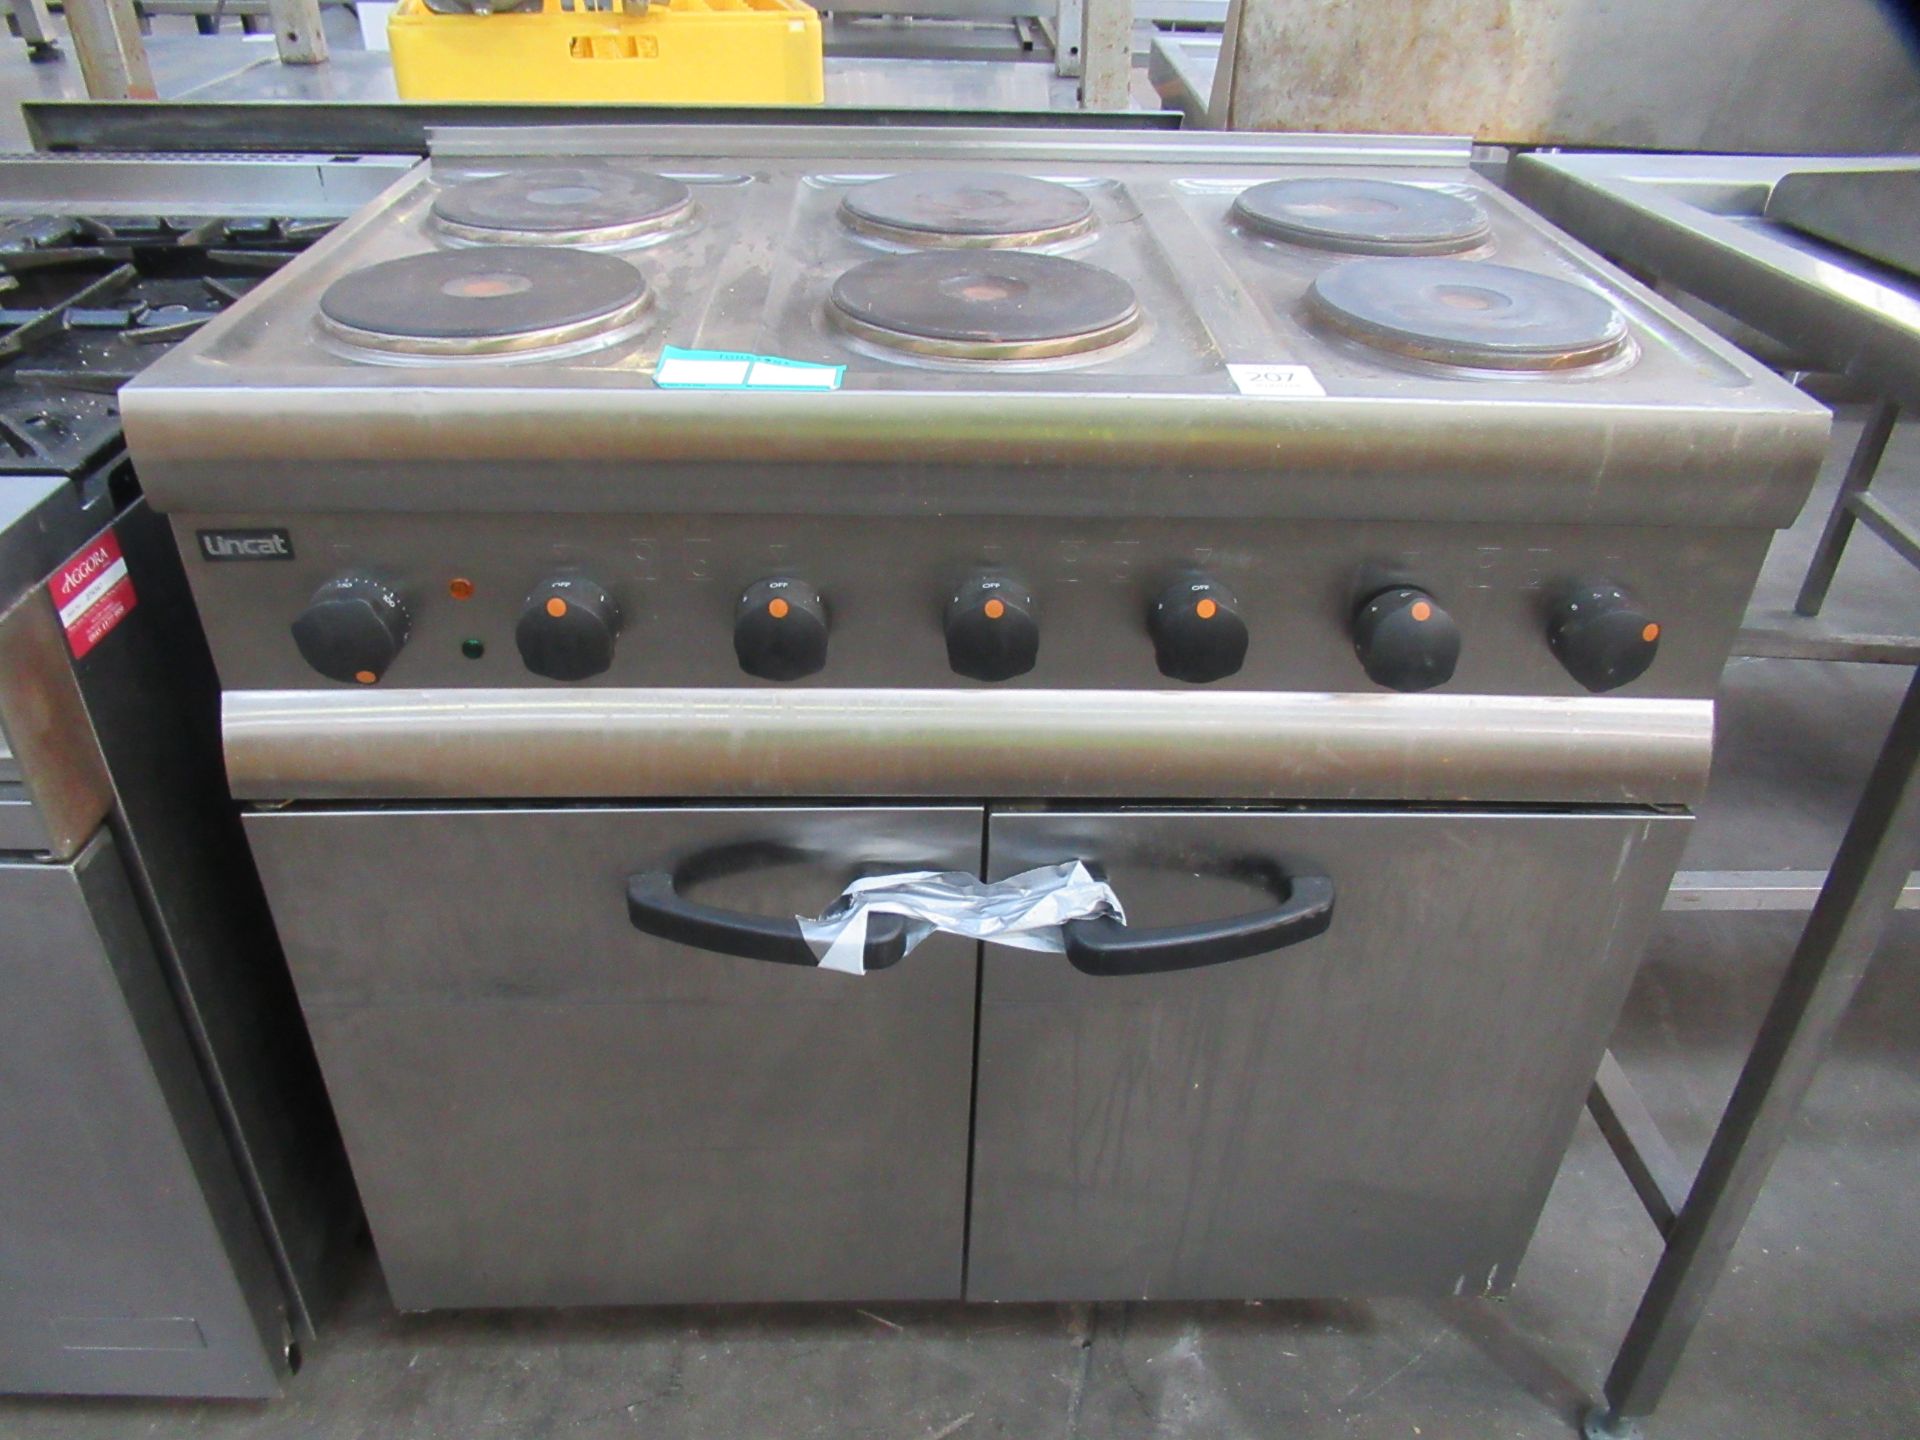 Lincat Commercial Catering Six Ring Electric Cooker - 3ph.